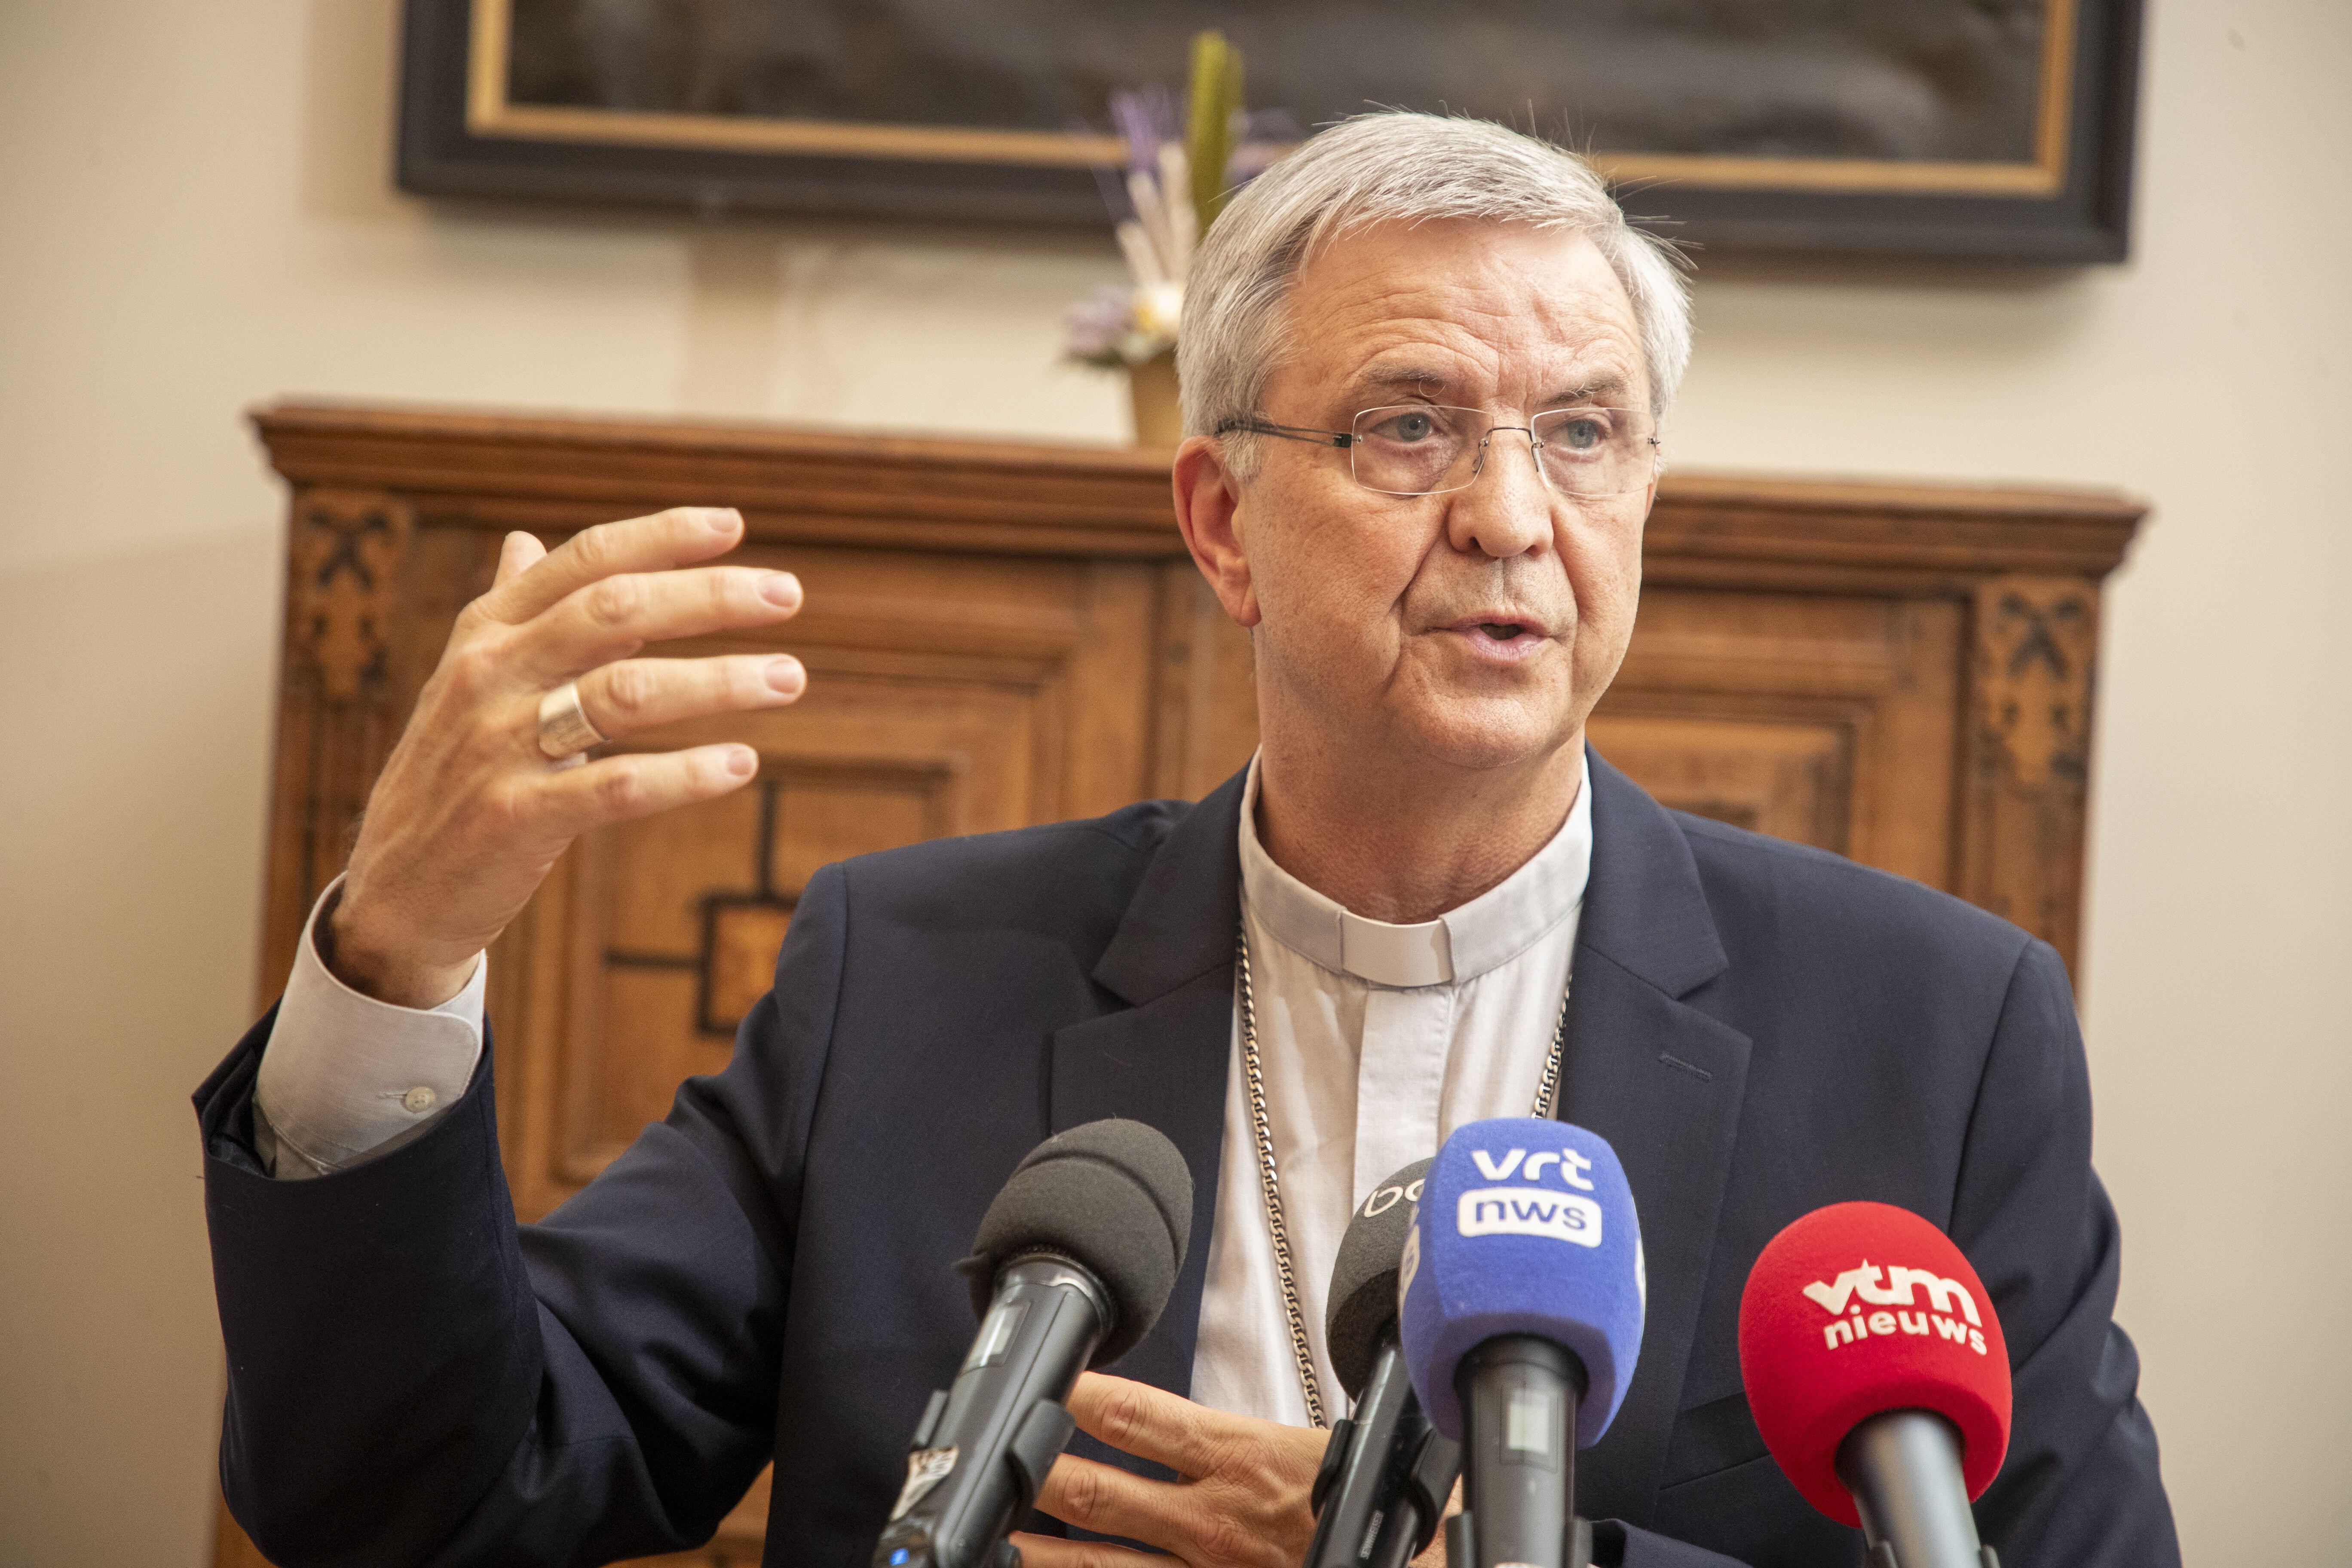 Frustration with Rome’s ‘vague’ response to abuser bishops